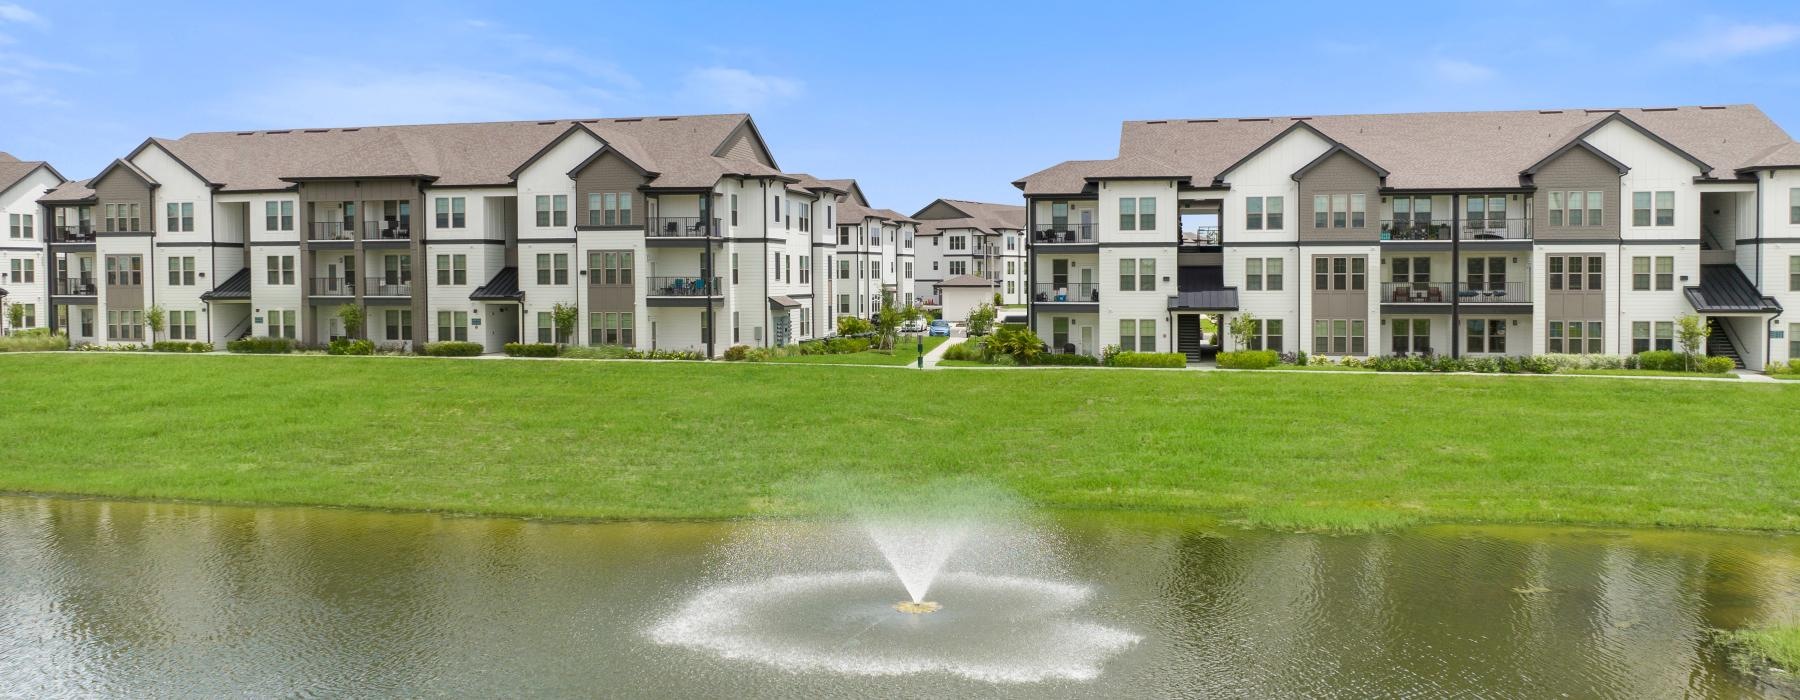 water fountains in large pond next to apartments